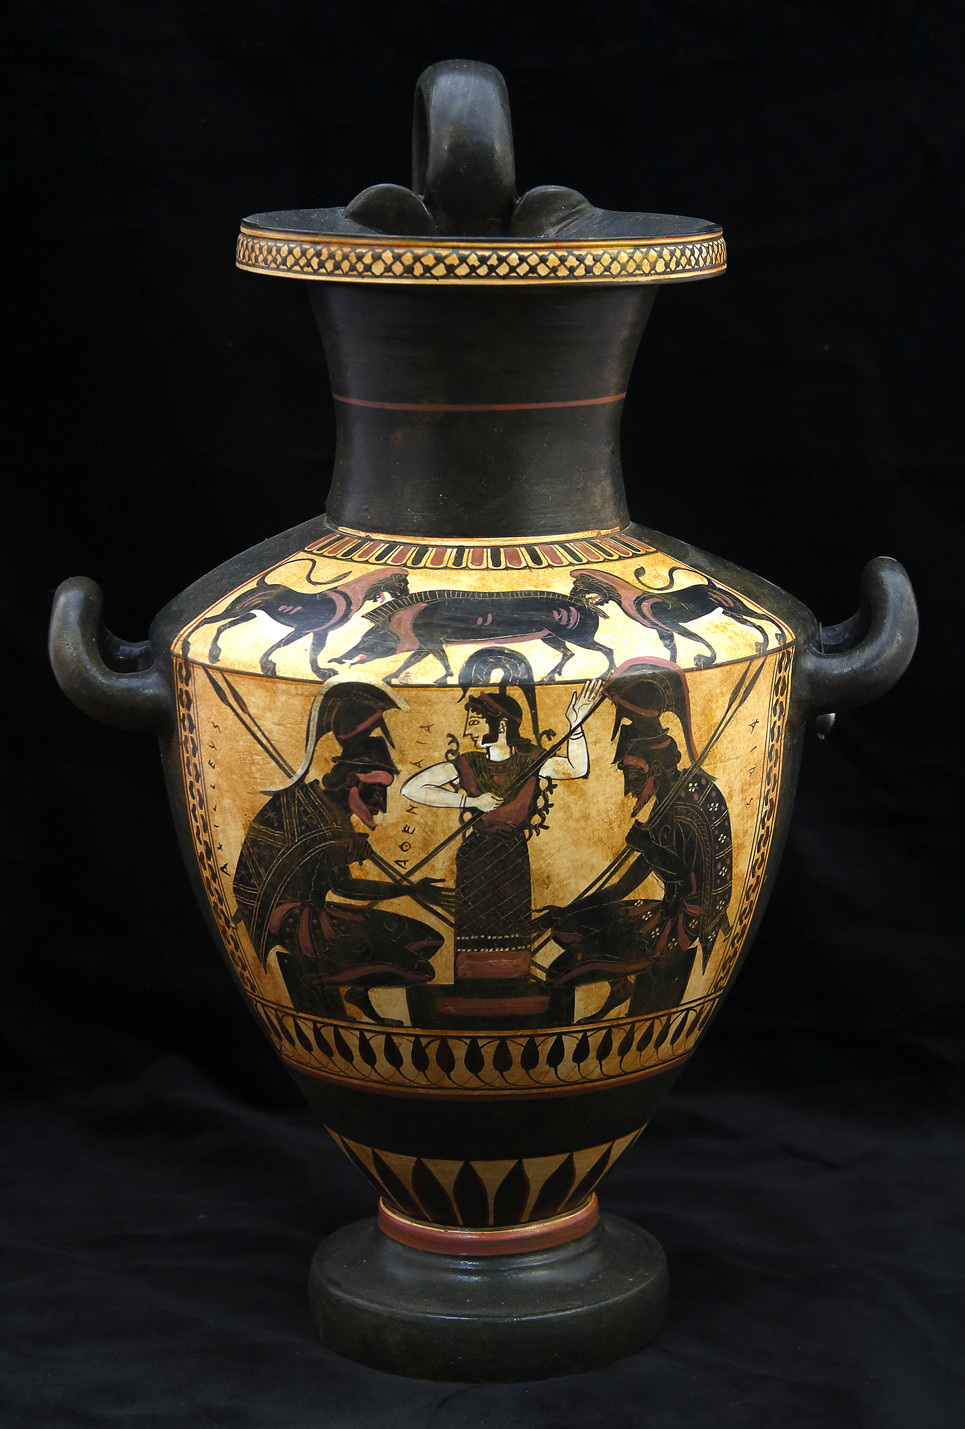 19 Unique athenian Black Figure Vases 2024 free download athenian black figure vases of greek pottery shop buy ancient greek vessels replicas ceramic vases in greek pottery shop black figured hydria with achilleas and ajax playing zatrikion and th